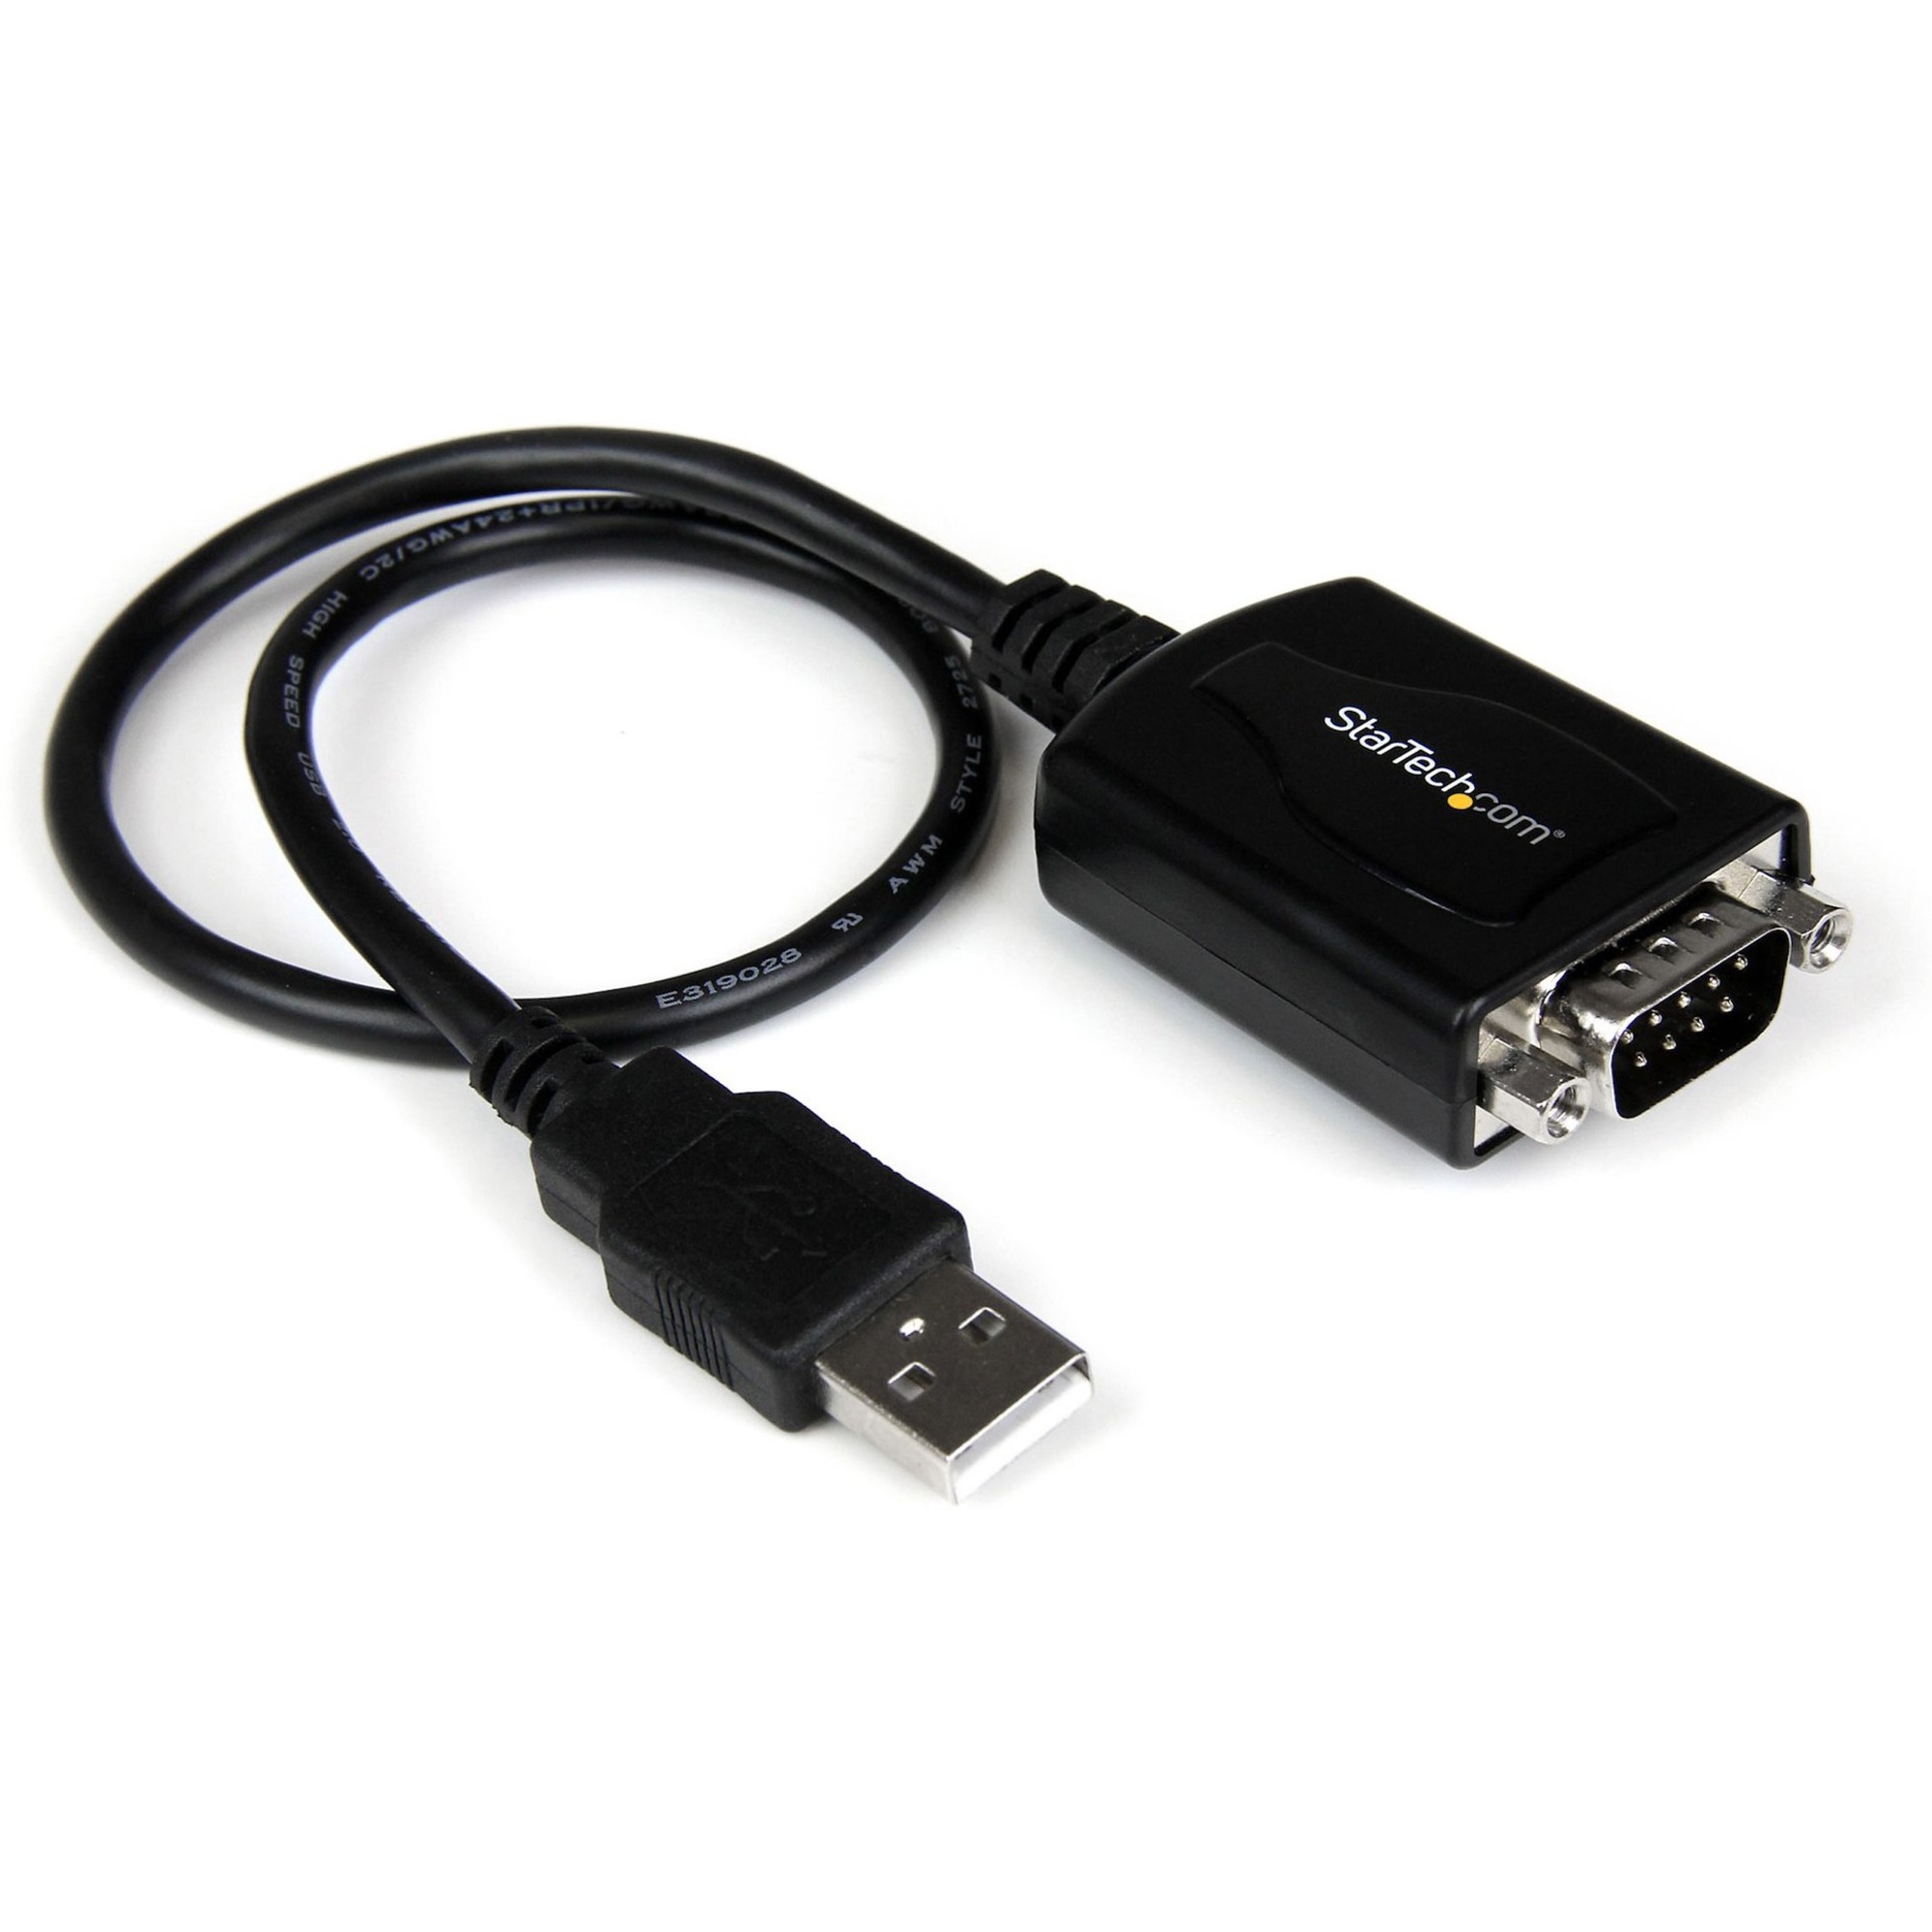 StarTech.com ICUSB232PRO USB to Serial Adapter - Prolific PL-2303 - COM Port Retention - USB to RS232 Adapter Cable - USB Serial - image 2 of 4